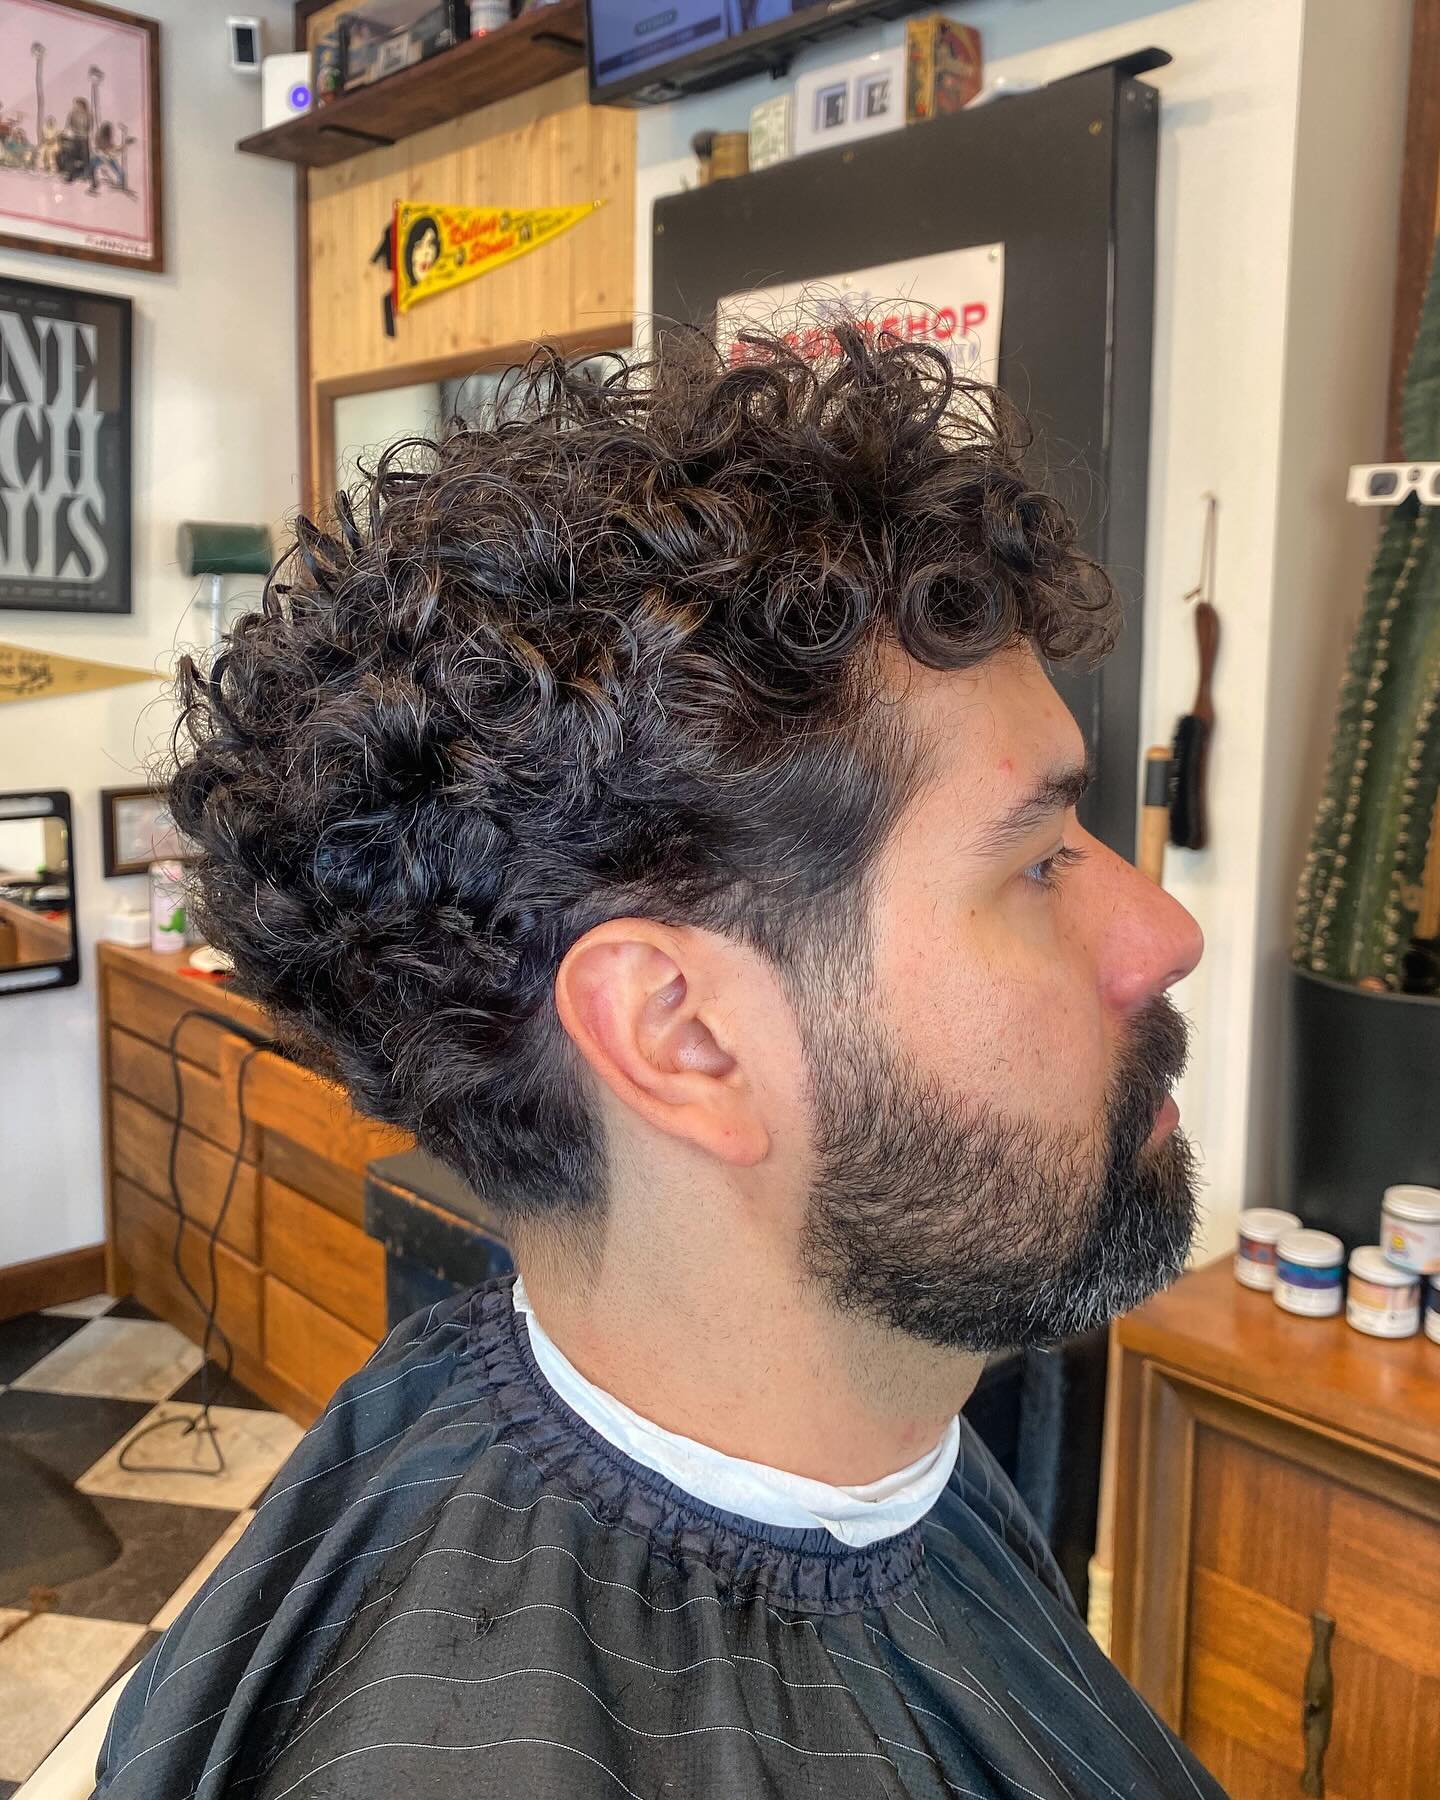 Curl maintenance by our barber Hank! Book with him at the link in our bio. #PhillyBarber #PhillyBarbers #PhillyBarberShop #PhillyBarbershops #SouthPhilly #💈